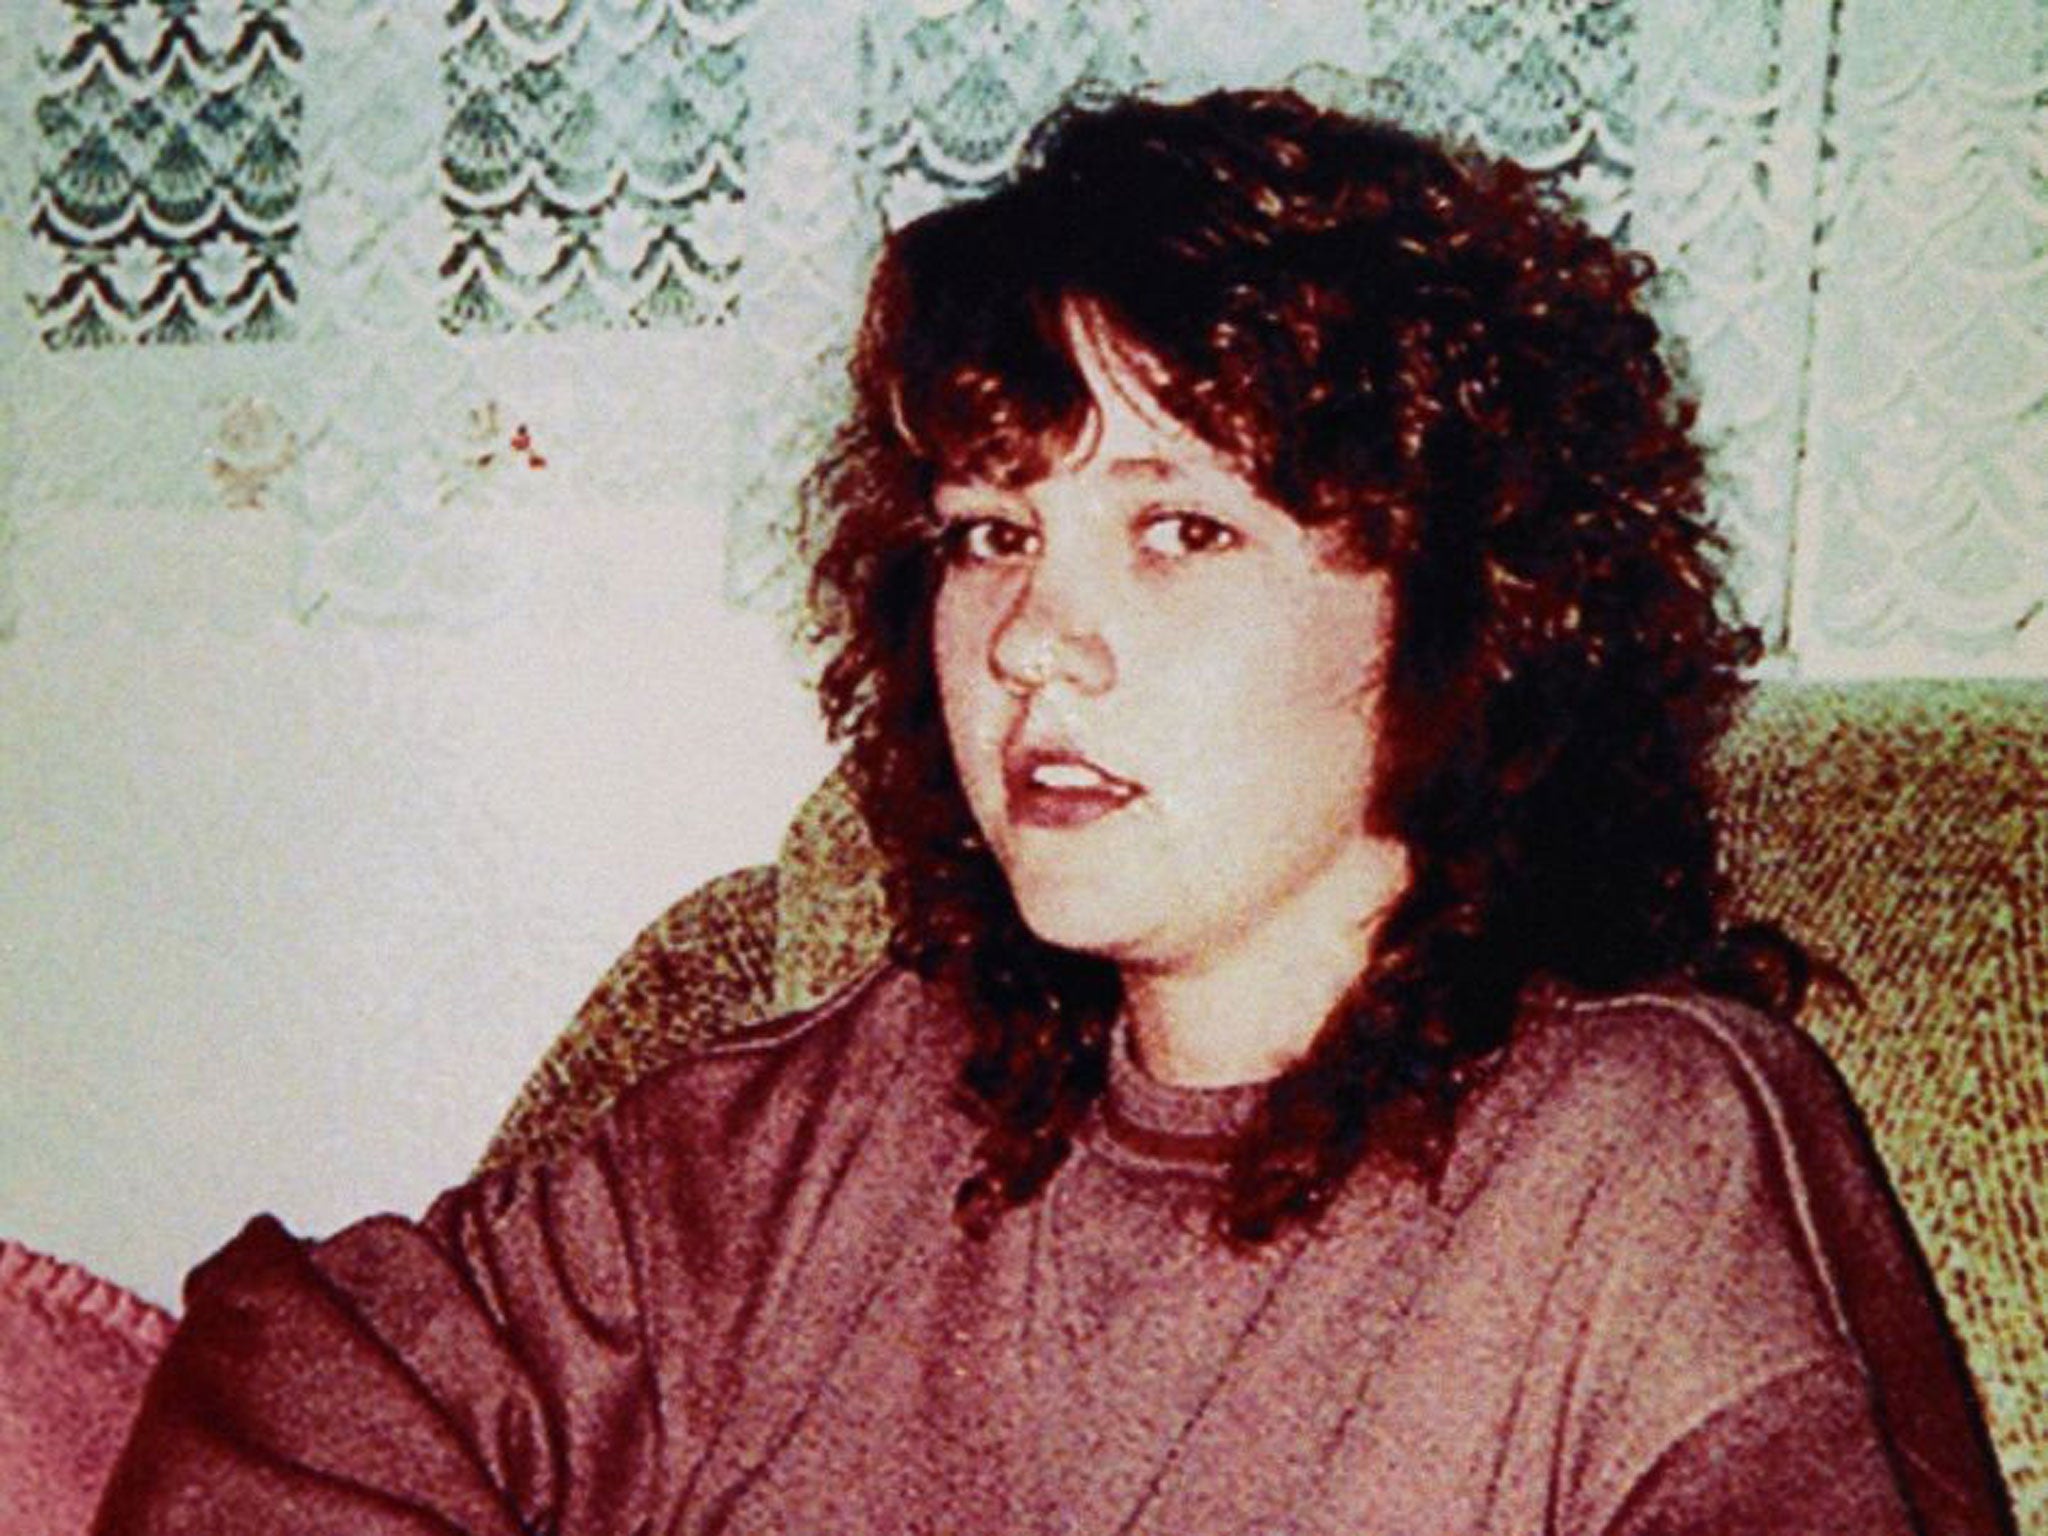 Undated handout file photo of Nicola Payne as police investigating the disappearance of the young mother 22 years ago have arrested two men on suspicion of her abduction and murder